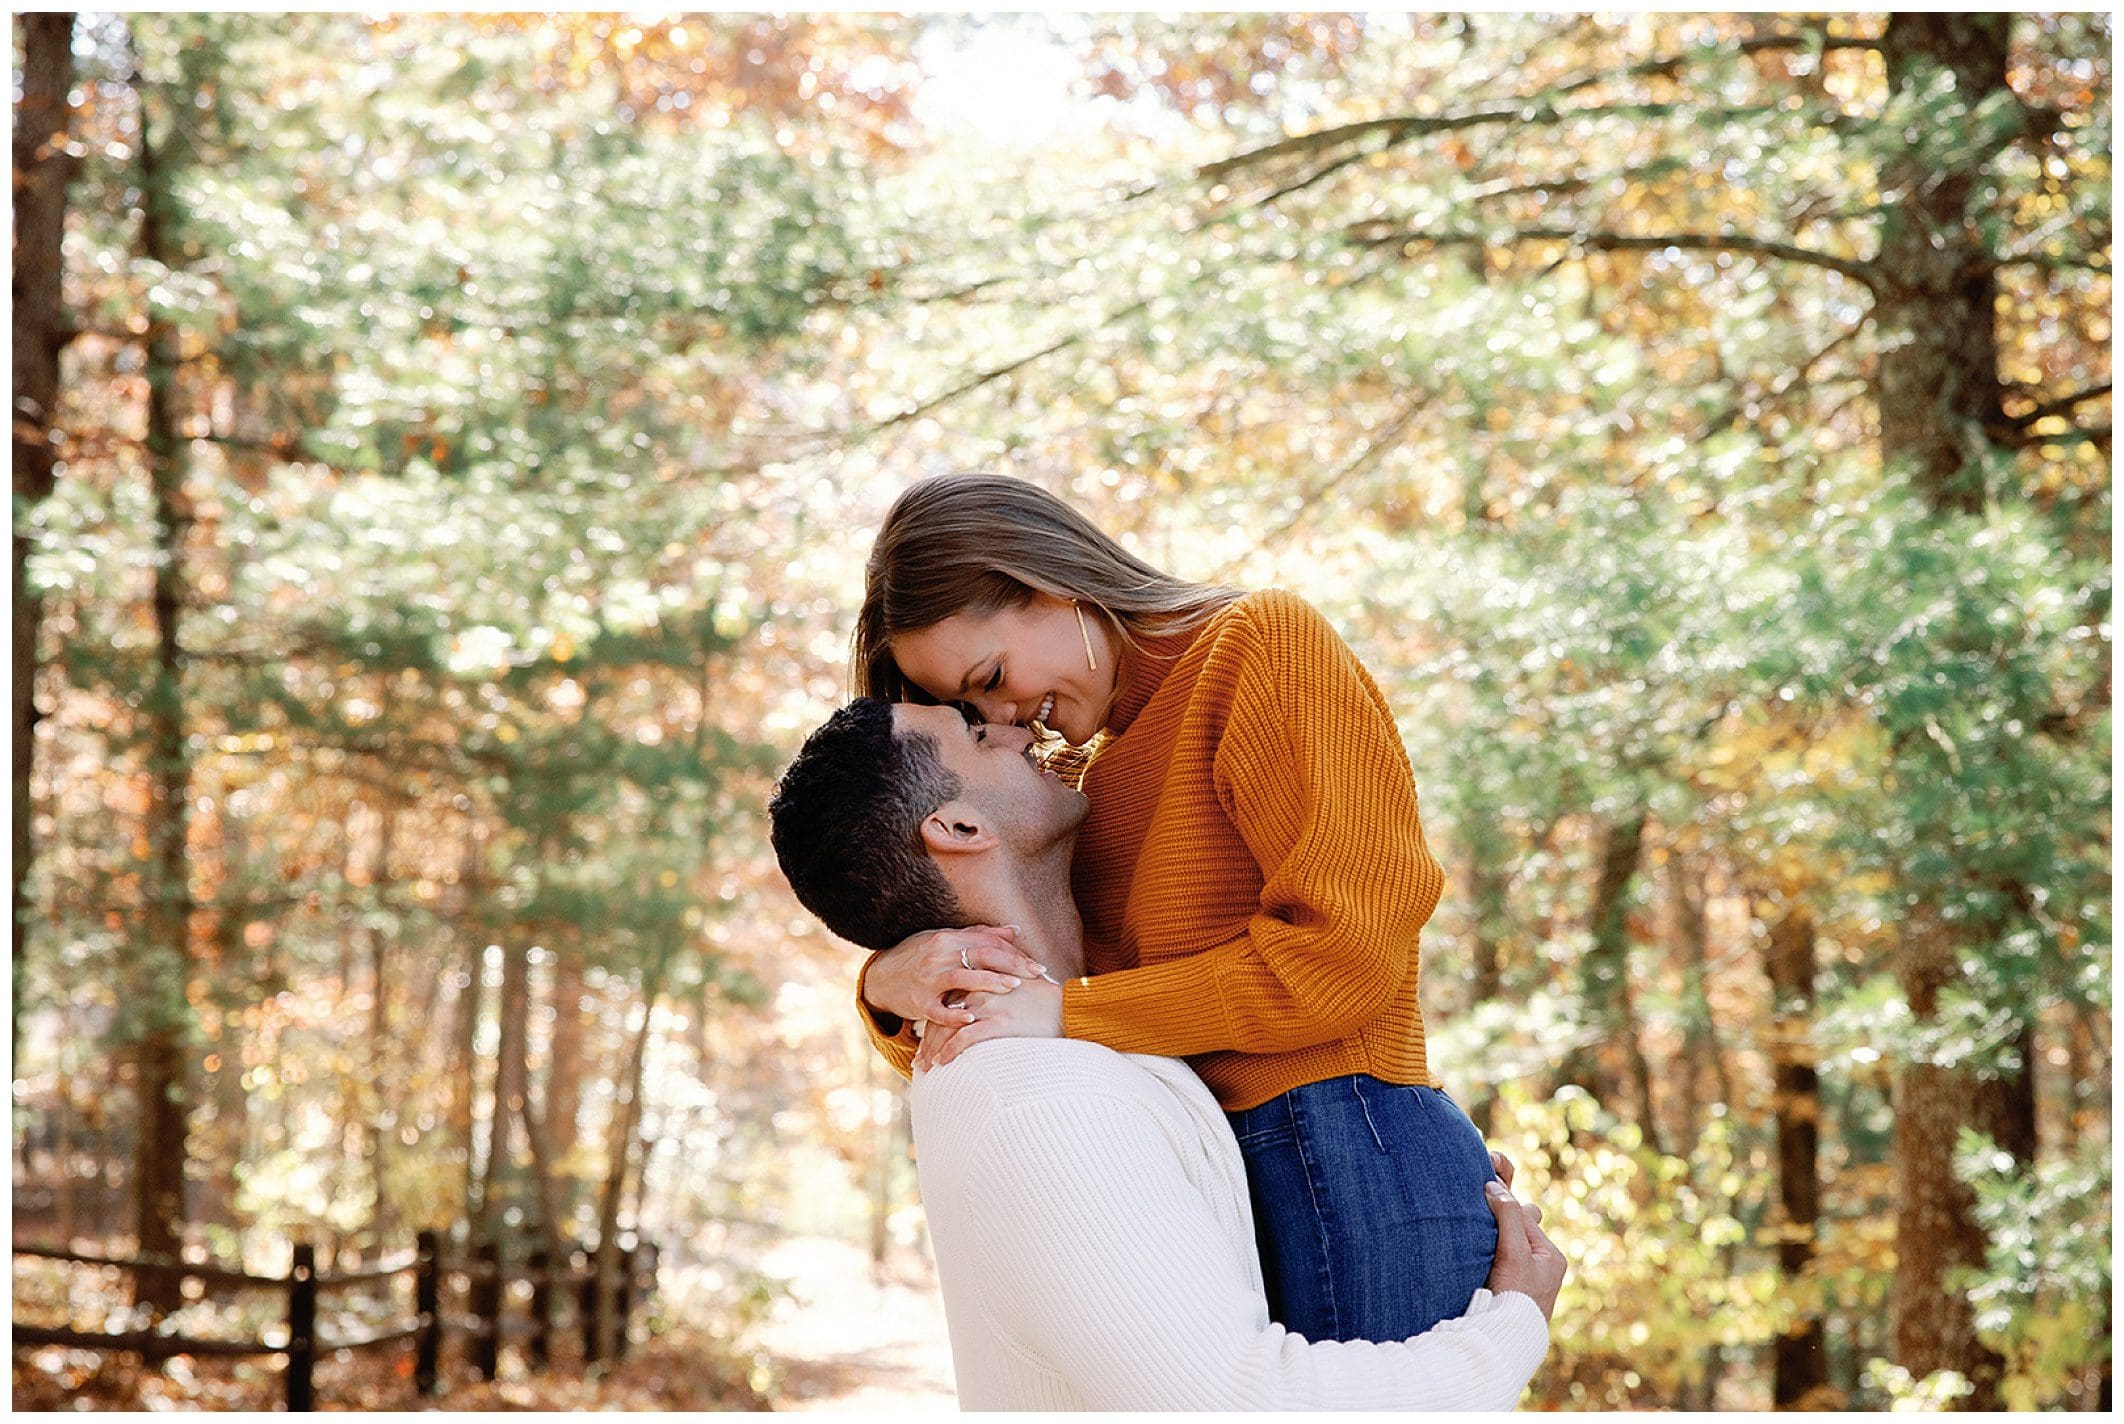 A couple sharing a tender sunrise engagement moment in an autumnal forest setting.